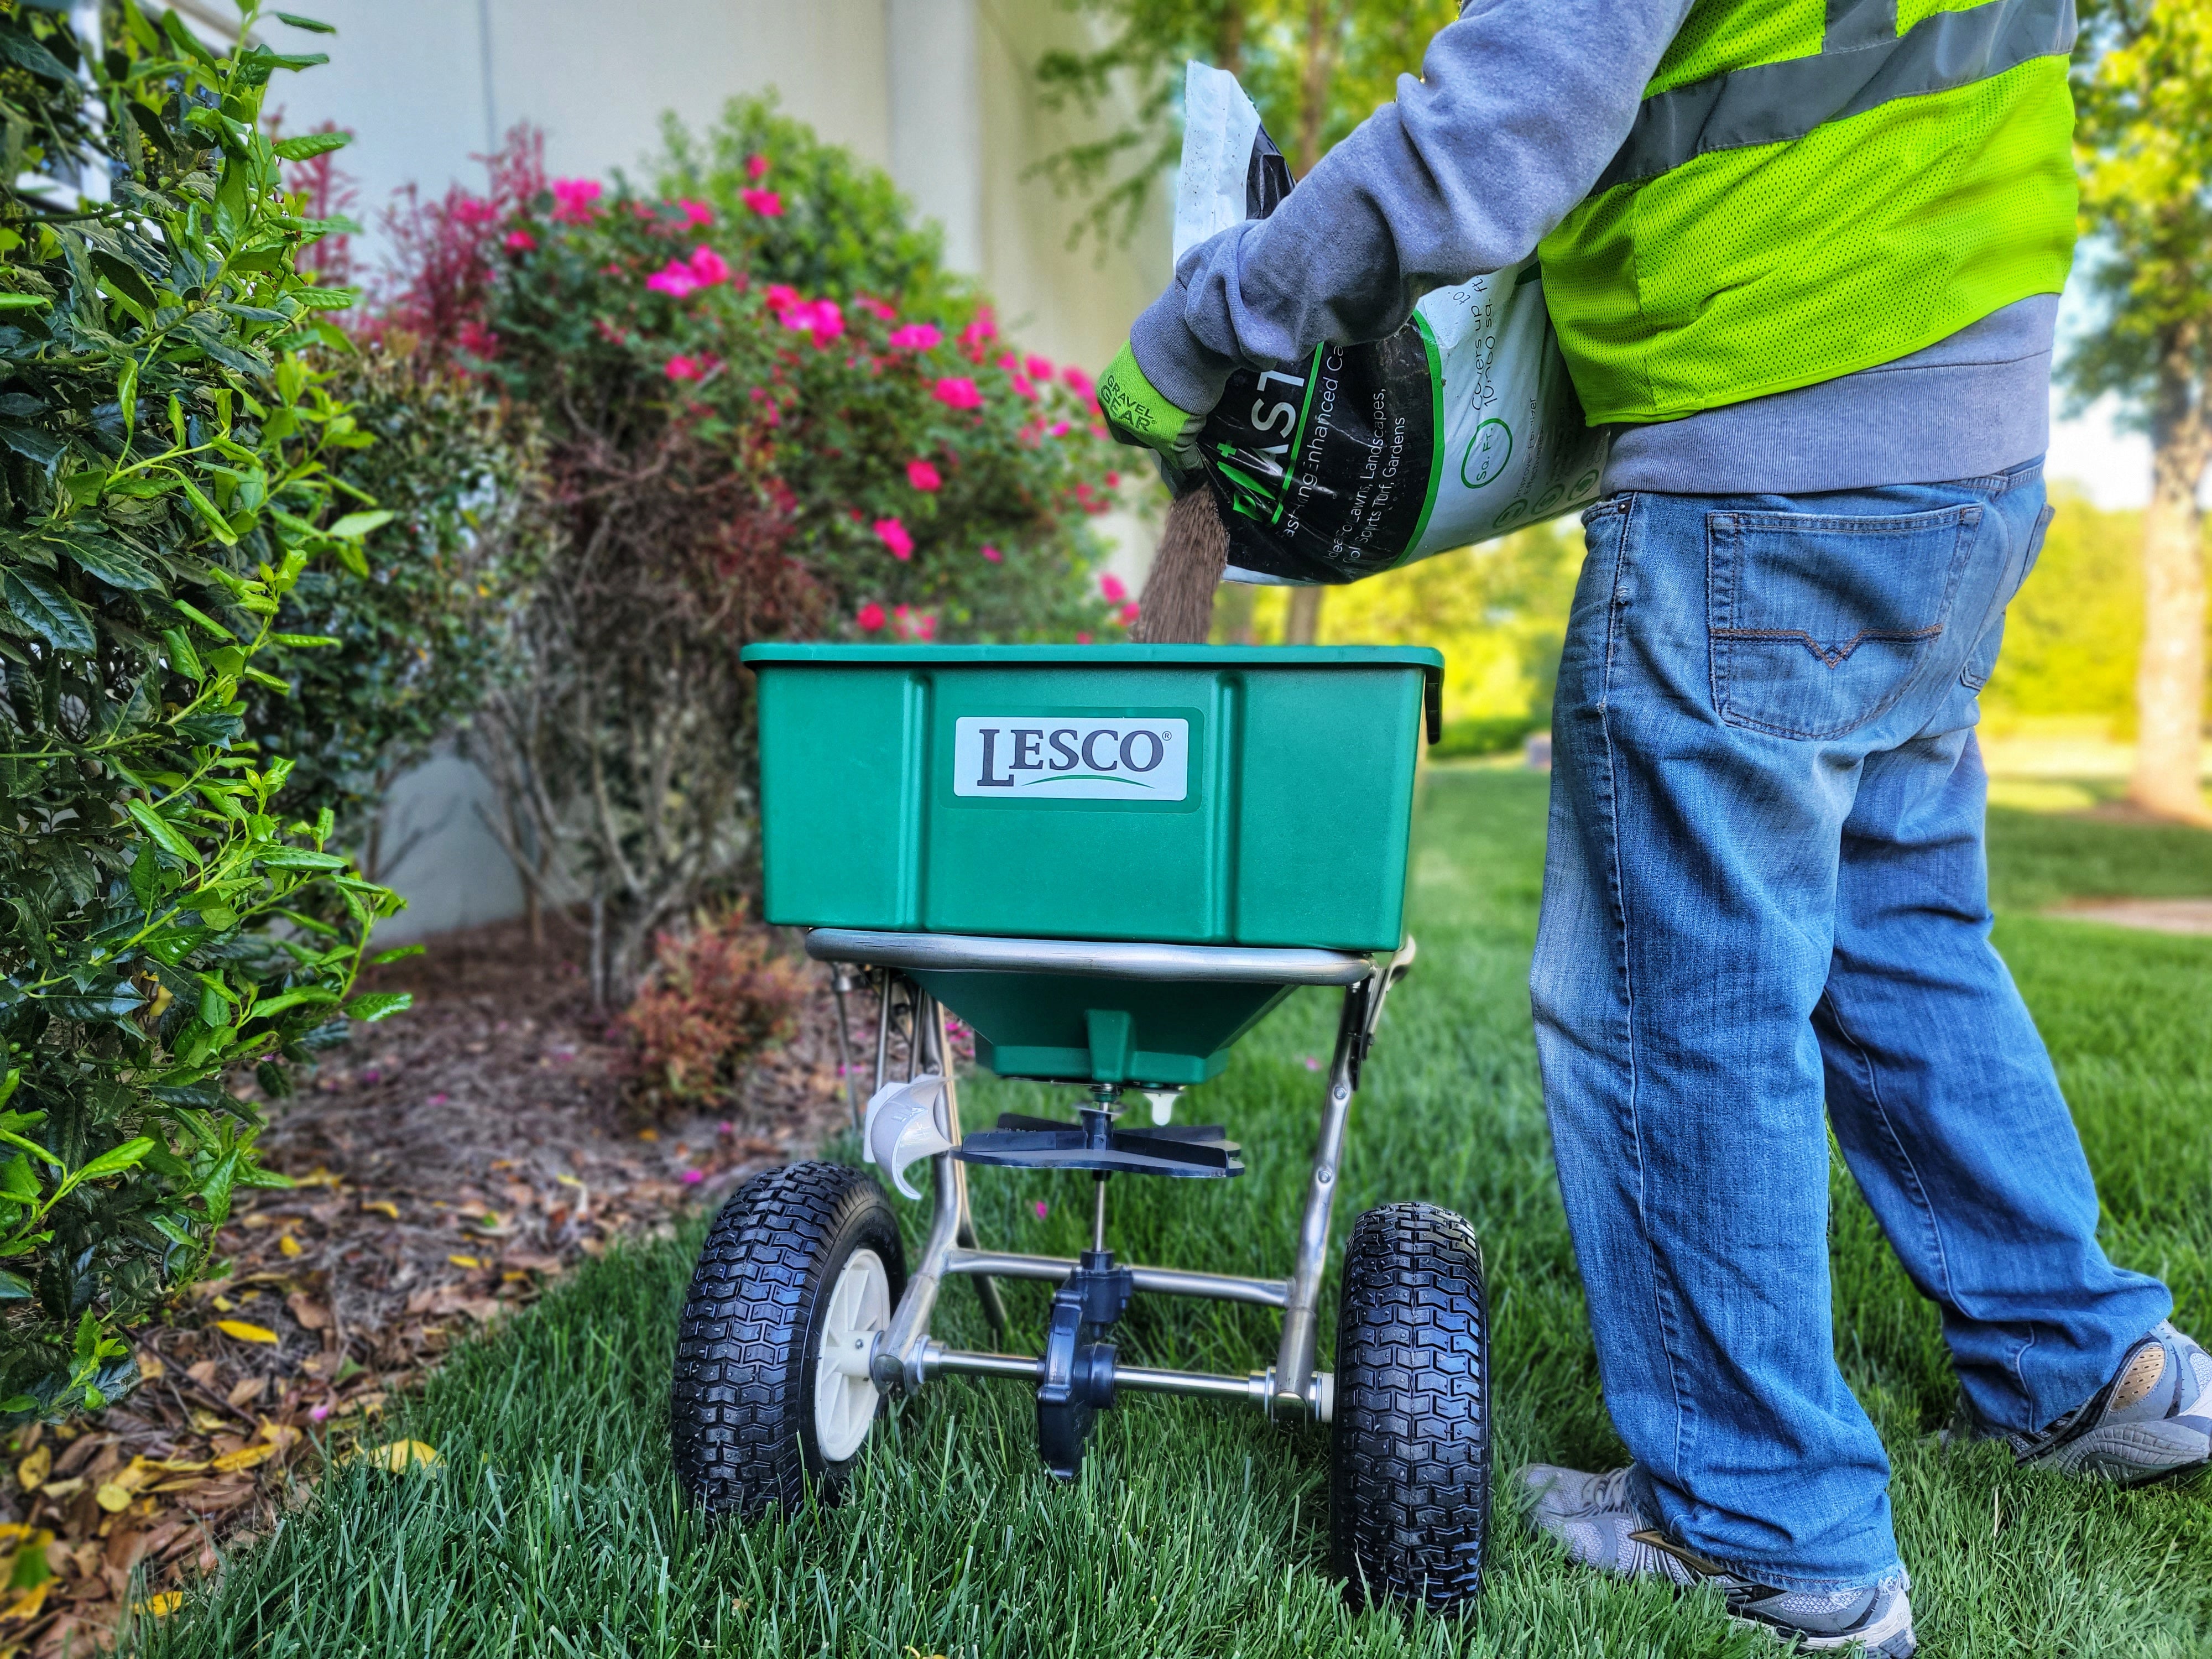 Sign up for Lawn Care Schedules